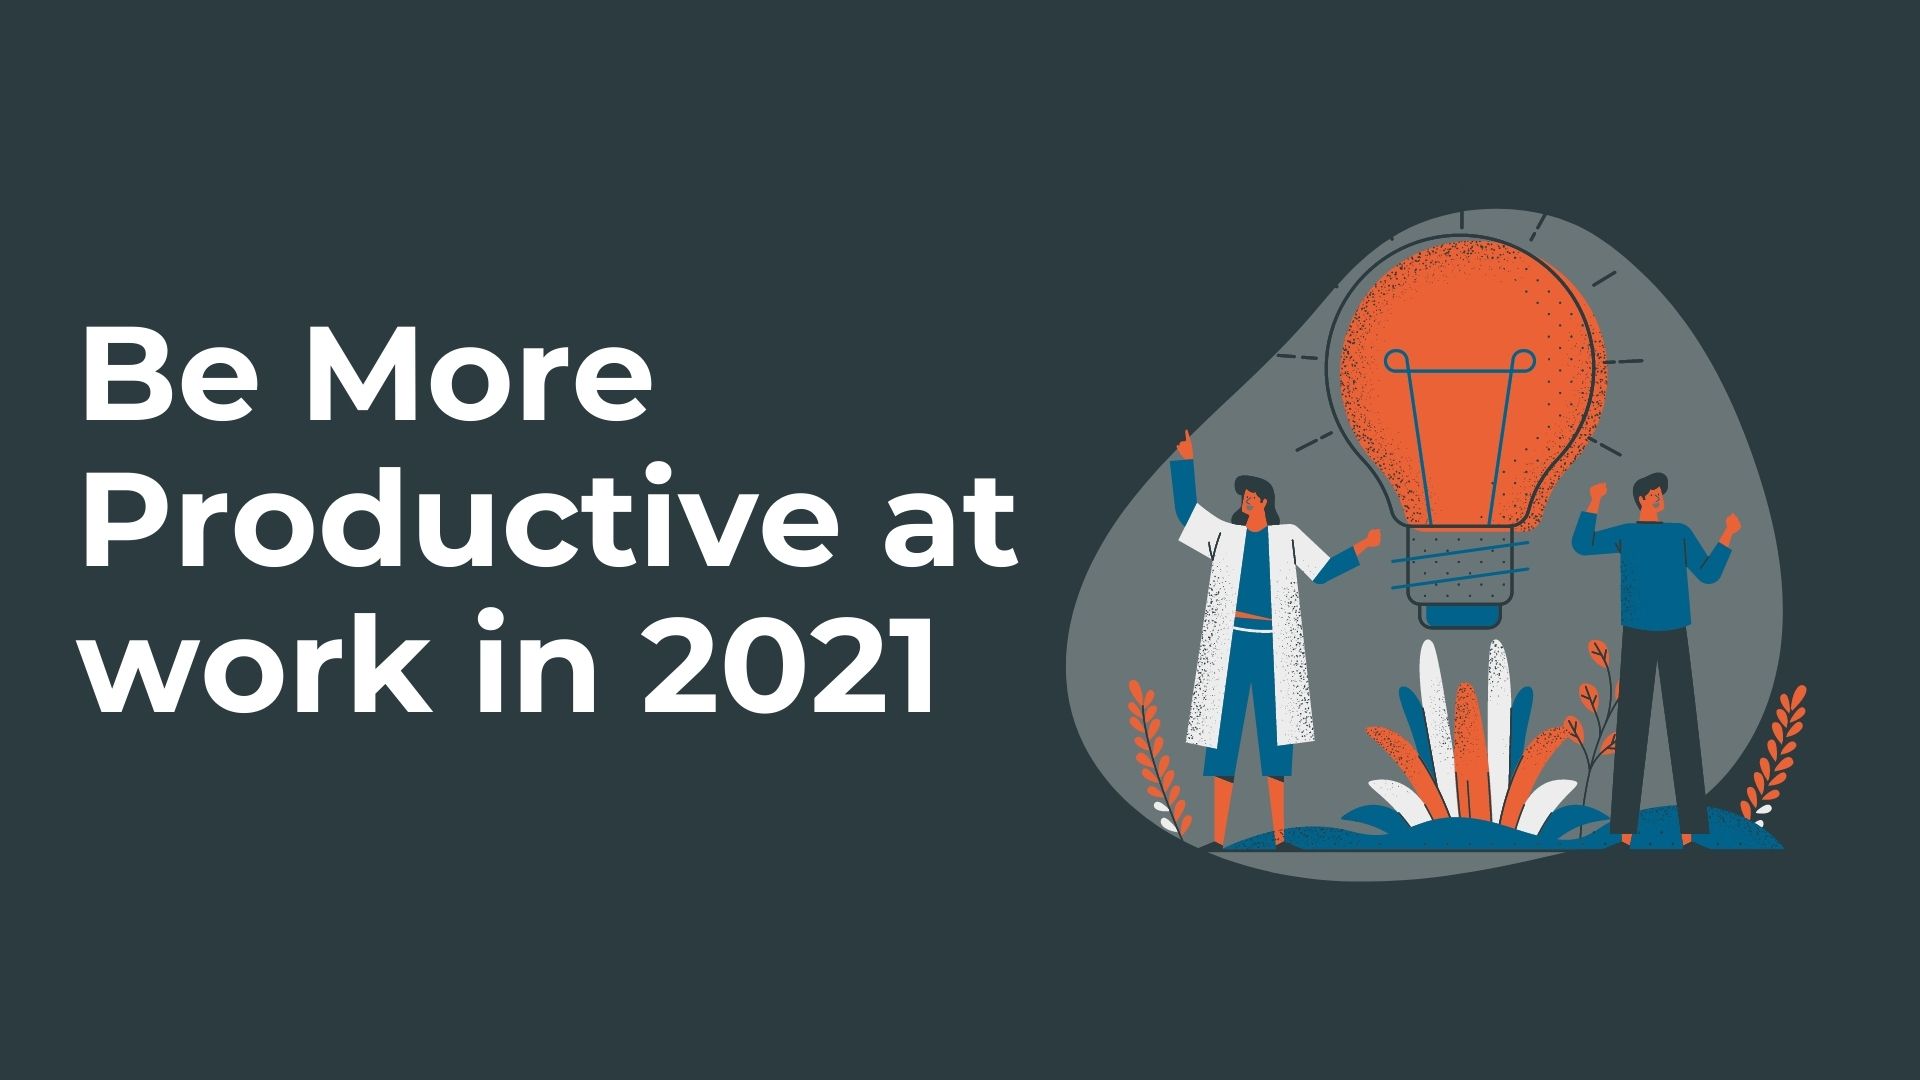 Be More Productive at Work in 2021: free up your time without slacking off